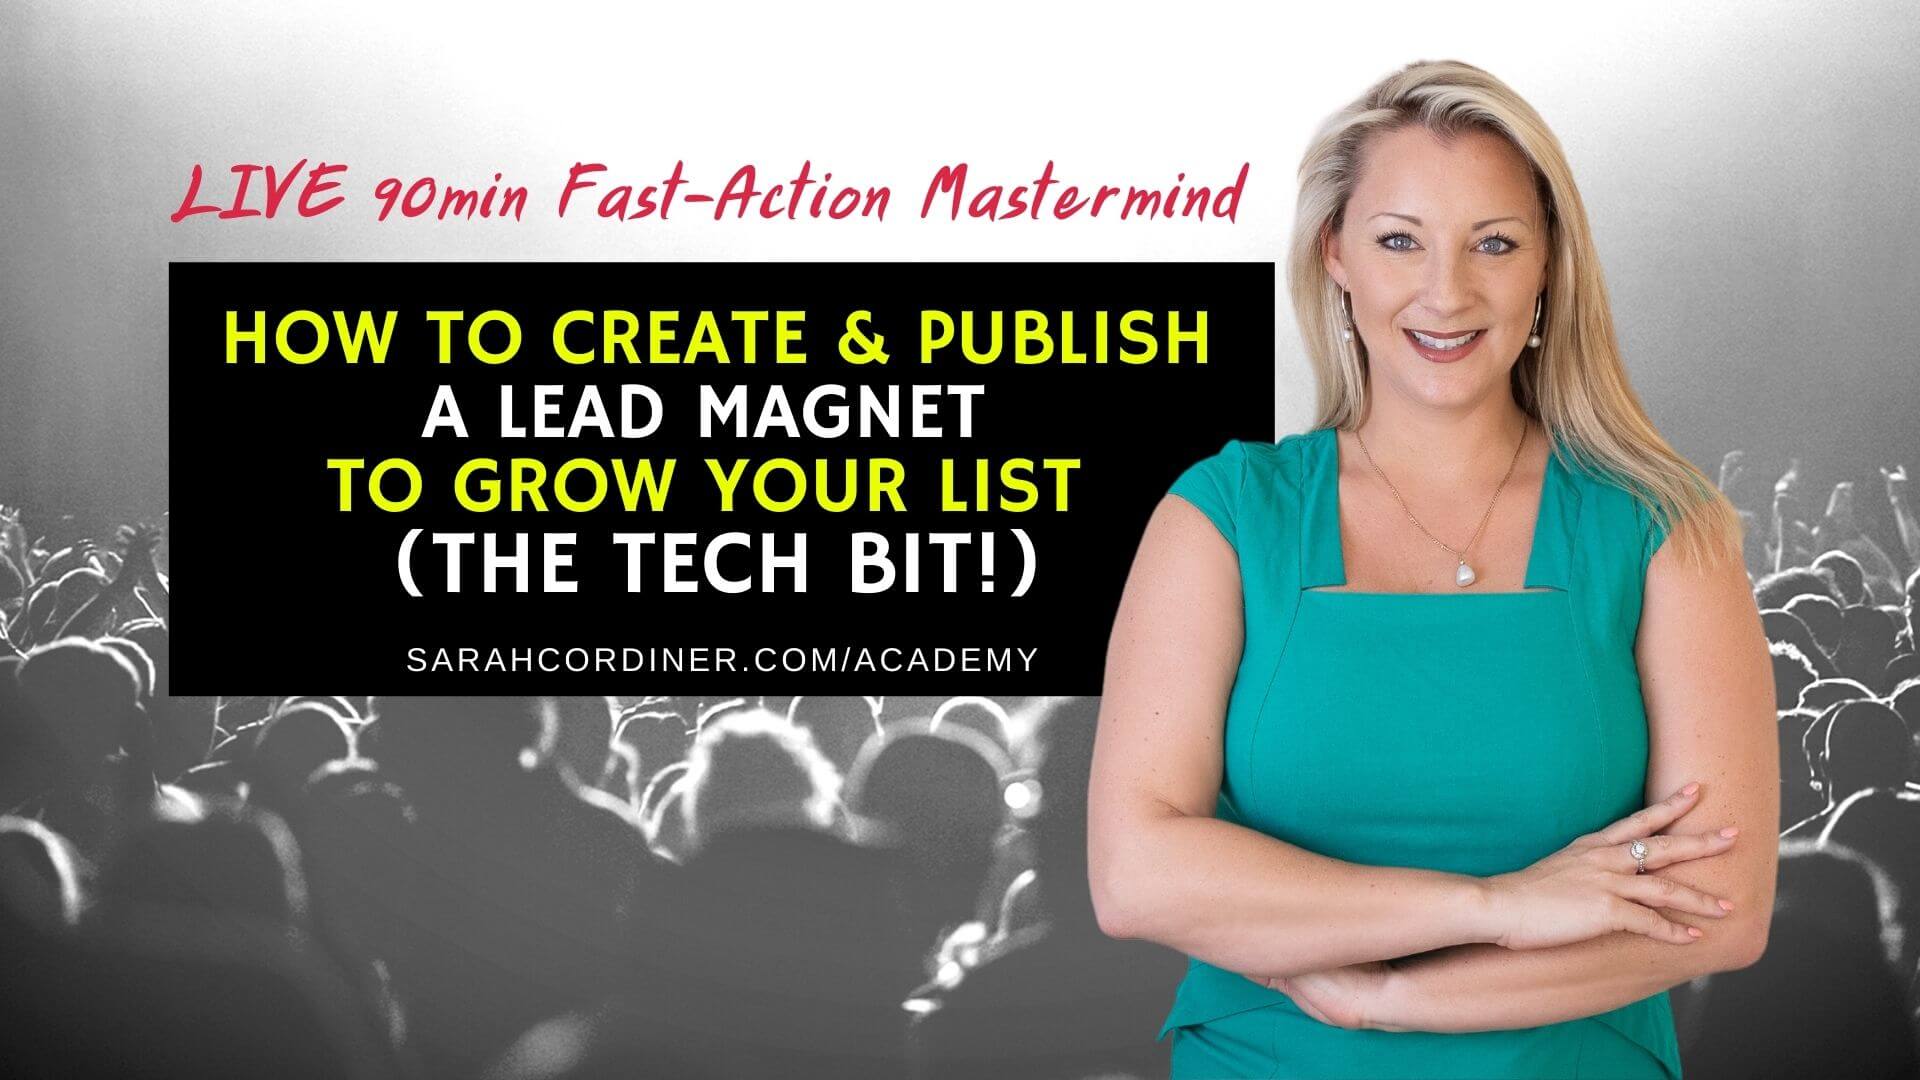 FEBRUARY - how to create and publish a Lead magnet - facebook event cover (1)